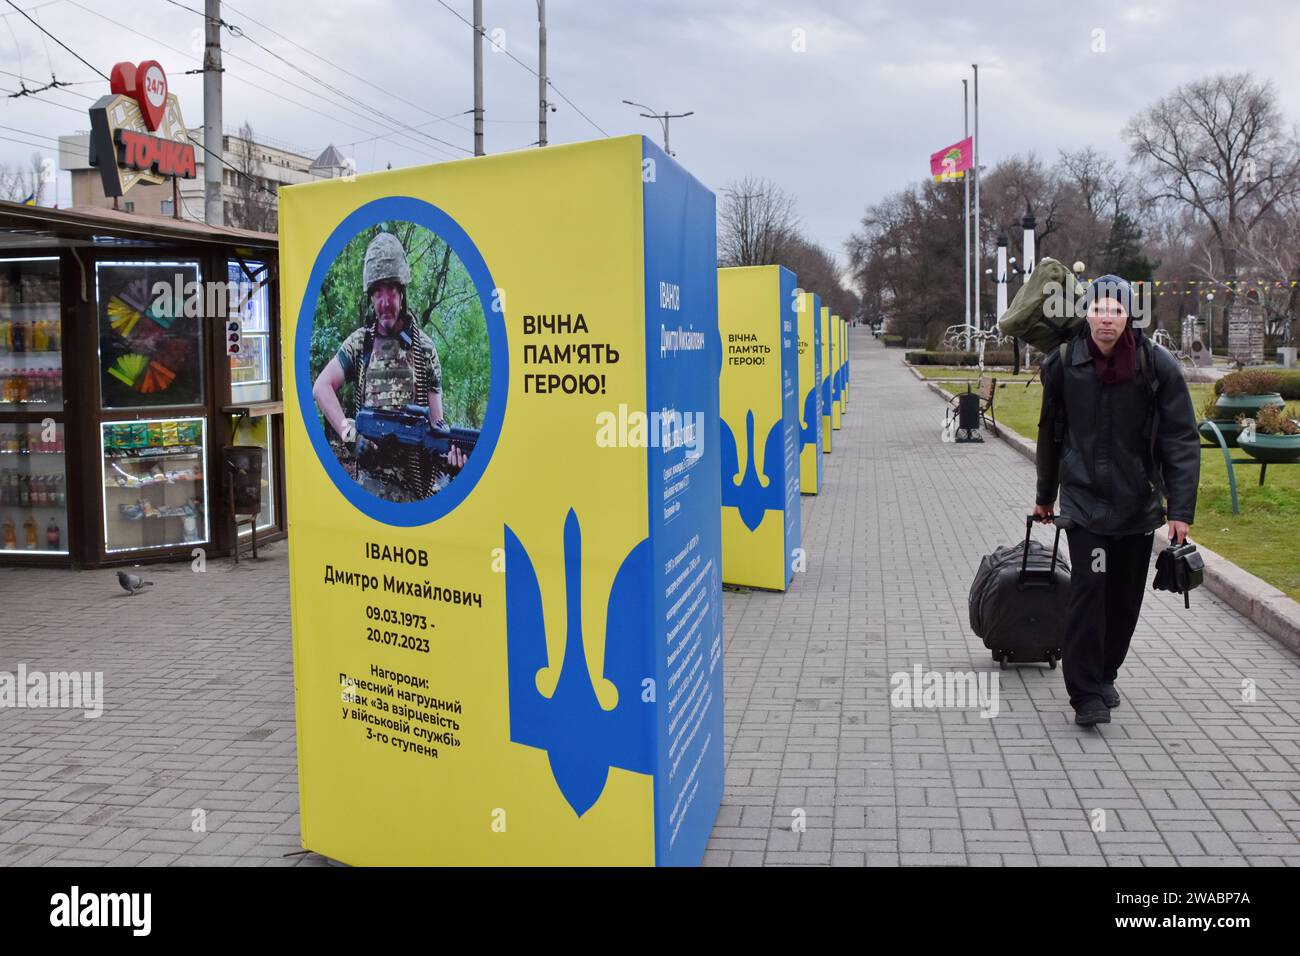 A man walks with his suitcase and backpack past stands of portraits of fallen Ukrainian soldiers in the center of Zaporizhzhia. Ukrainian President Volodymyr Zelenskiy said Russian forces are suffering heavy losses and the notion that Moscow is winning the nearly two-year-old war is only a 'feeling' not based on reality. There was no response to a request for comment from Russian officials on Zelenskiy's remarks. Russian officials have said Western estimates of Russian death tolls are vastly exaggerated and almost always underestimate Ukrainian losses. Stock Photo